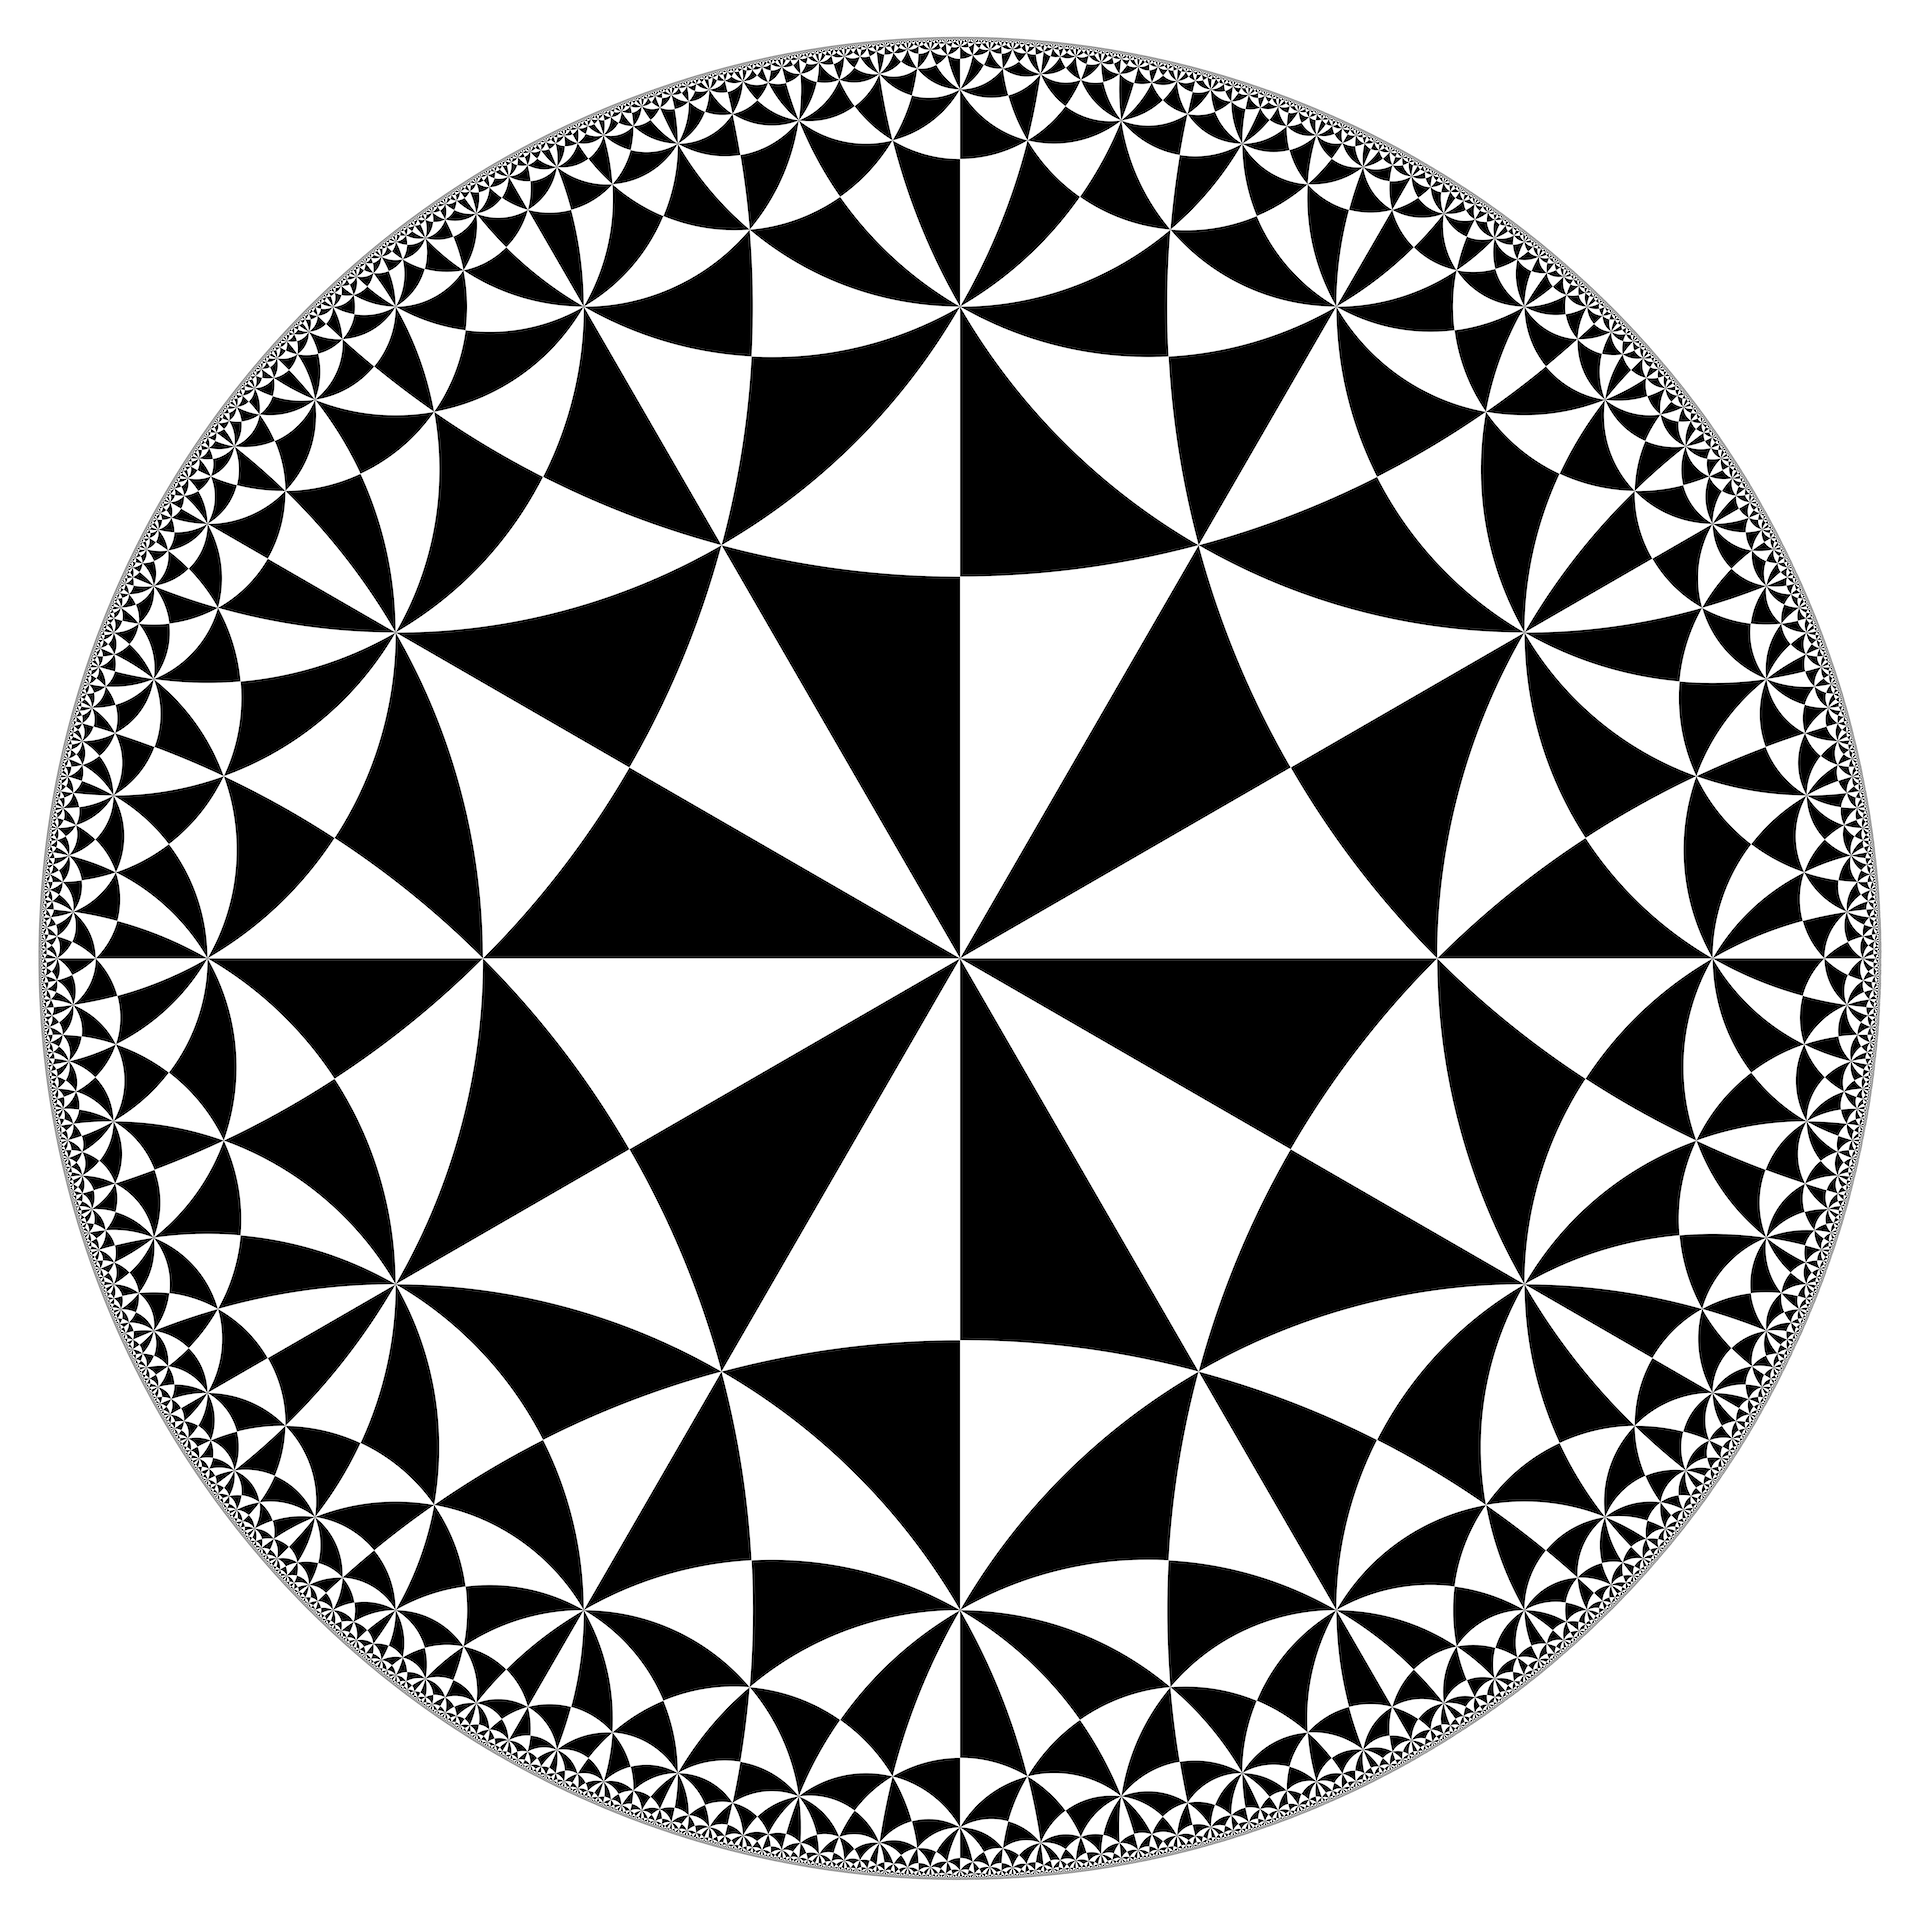 A Triangle Tiling (6, 4, 2)